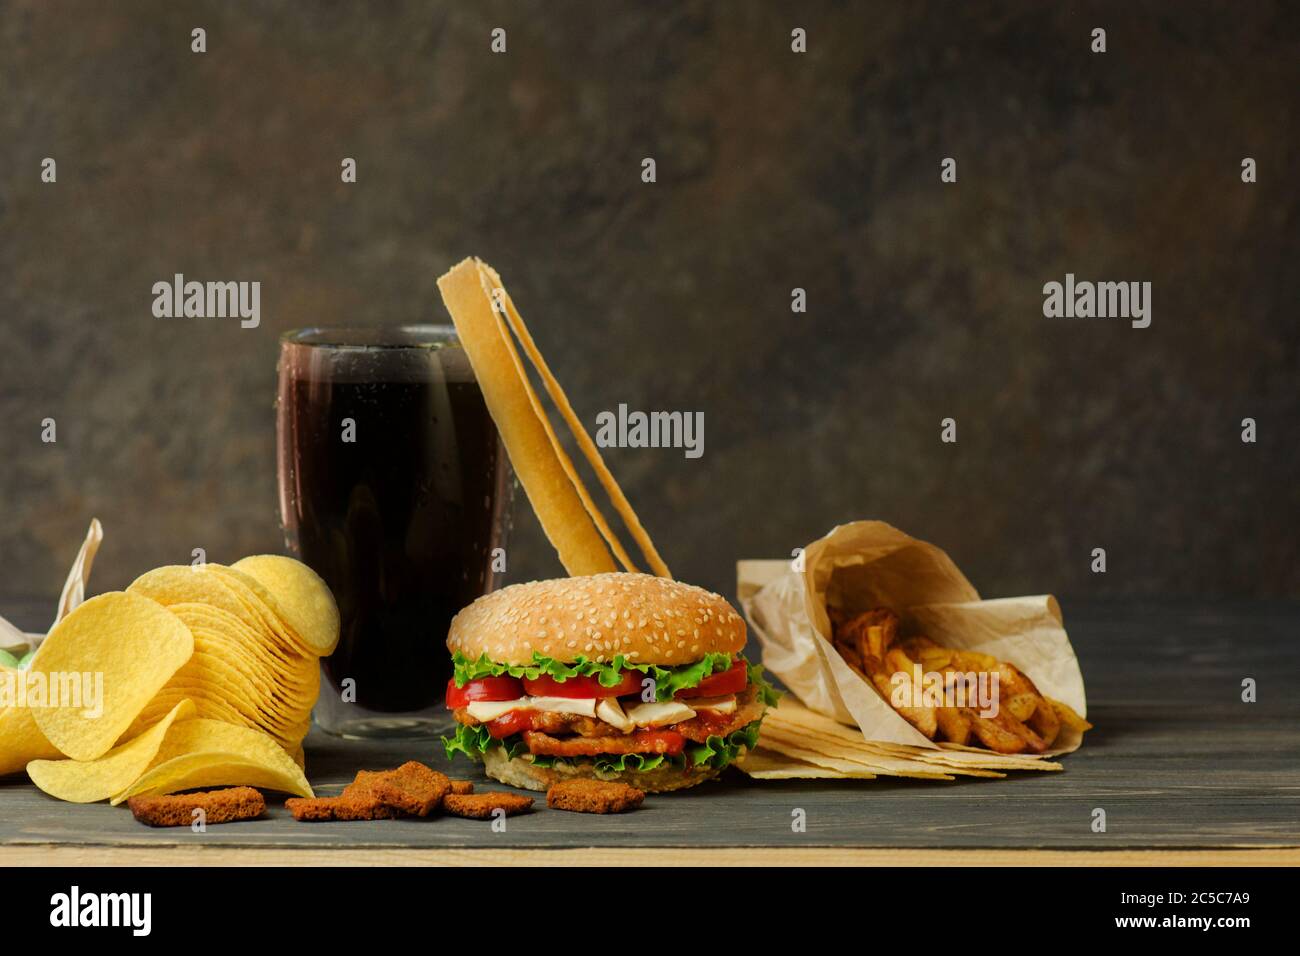 Fast food and snack concept. Unhealthy nutrition hamburger, potato fries and cola. Stock Photo